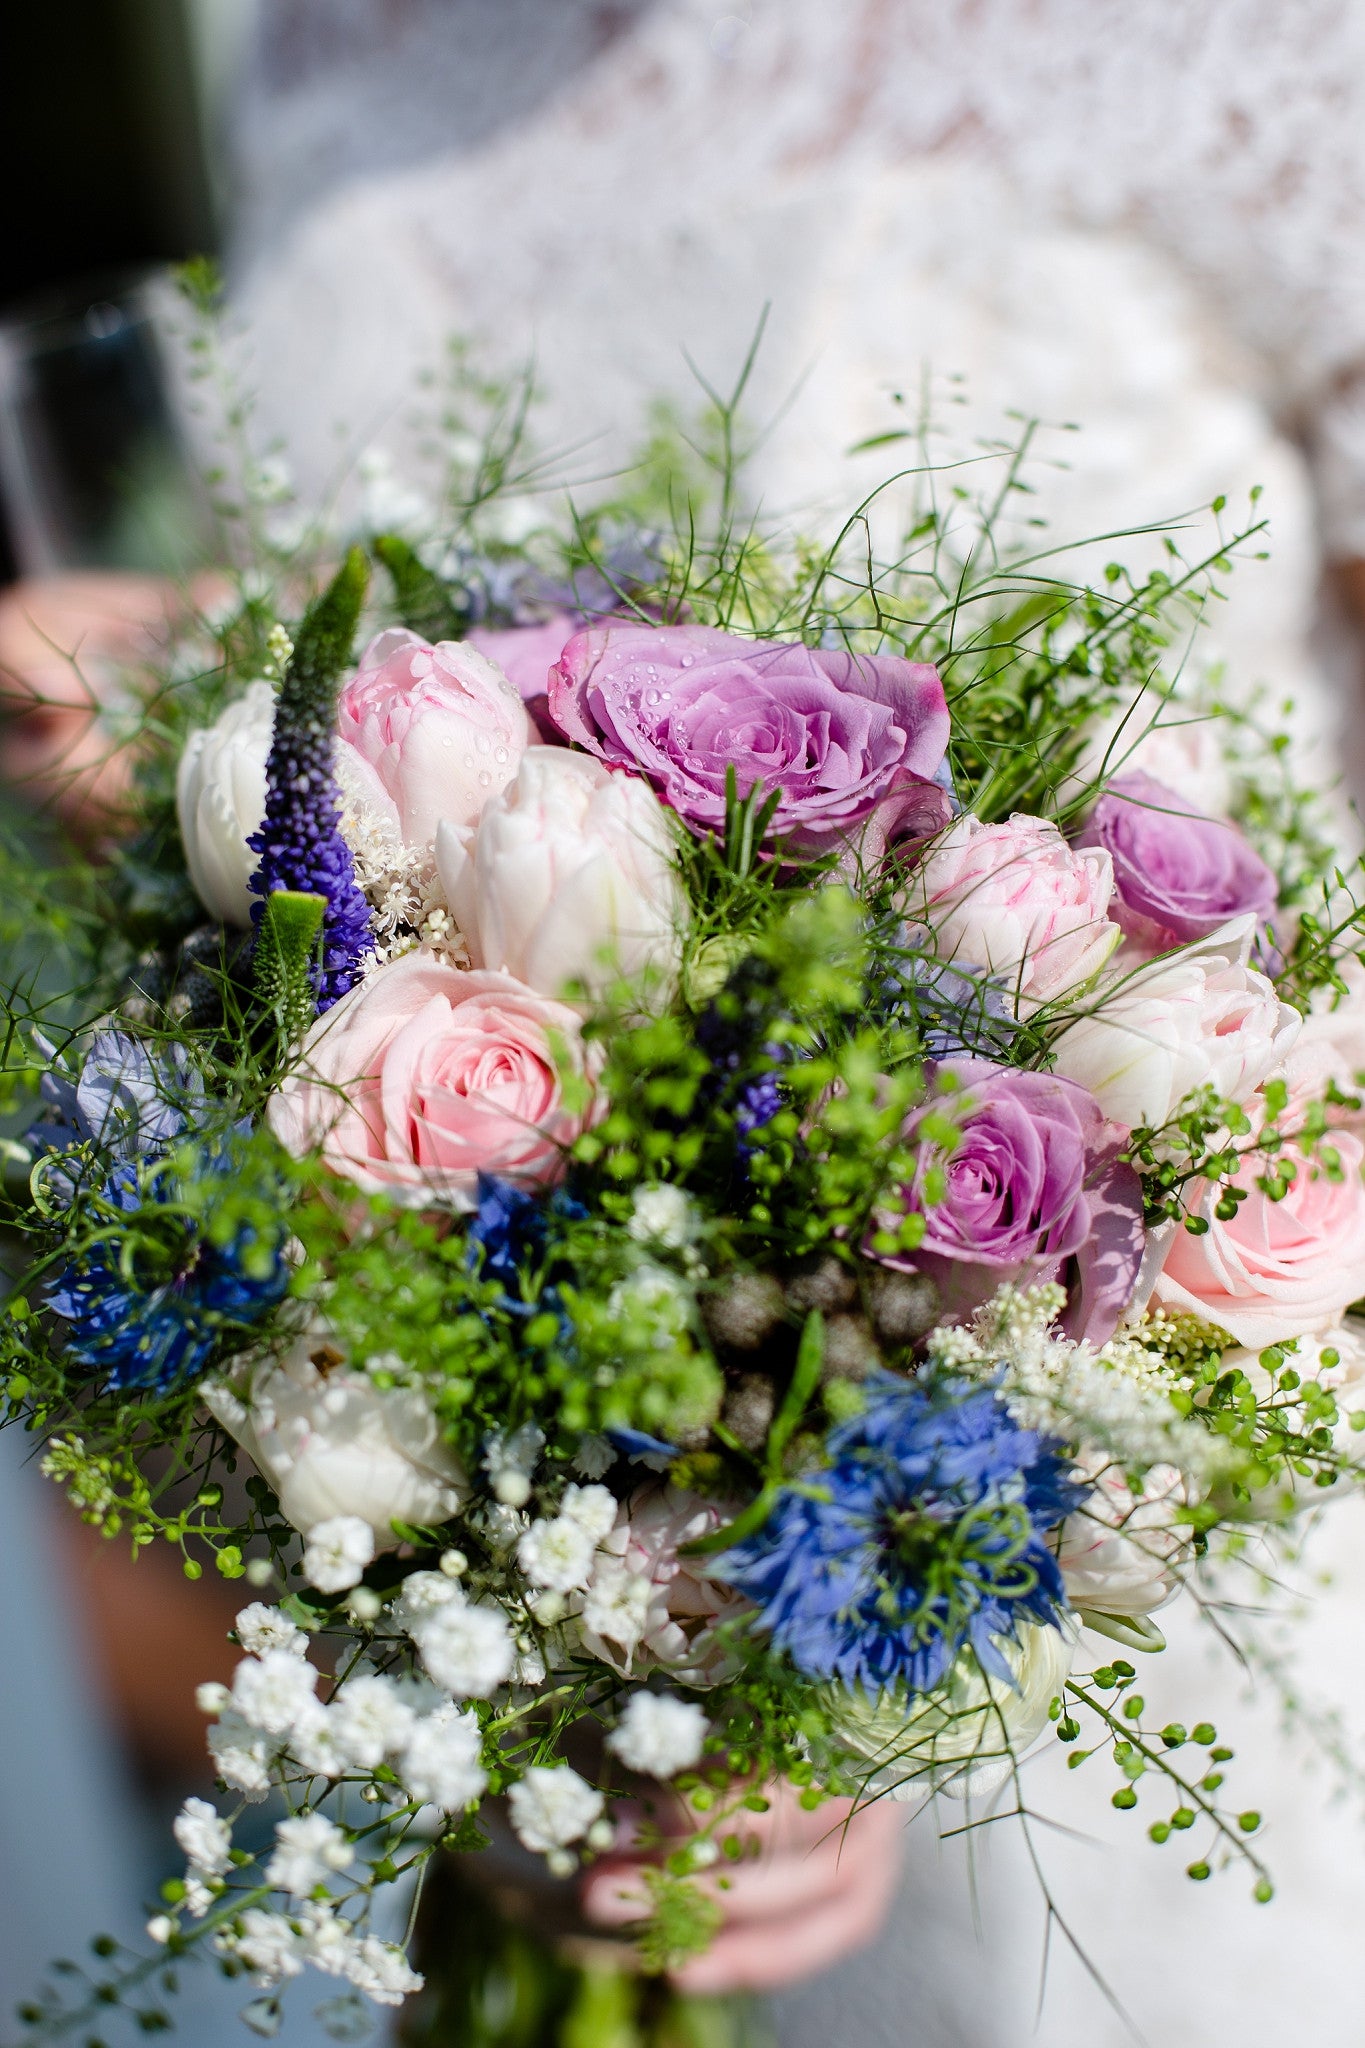 Bridal bouquet with pale pink Roses, lilac Lisianthus, blue Nigella, Veronica, Thlaspi and Gypsophila.